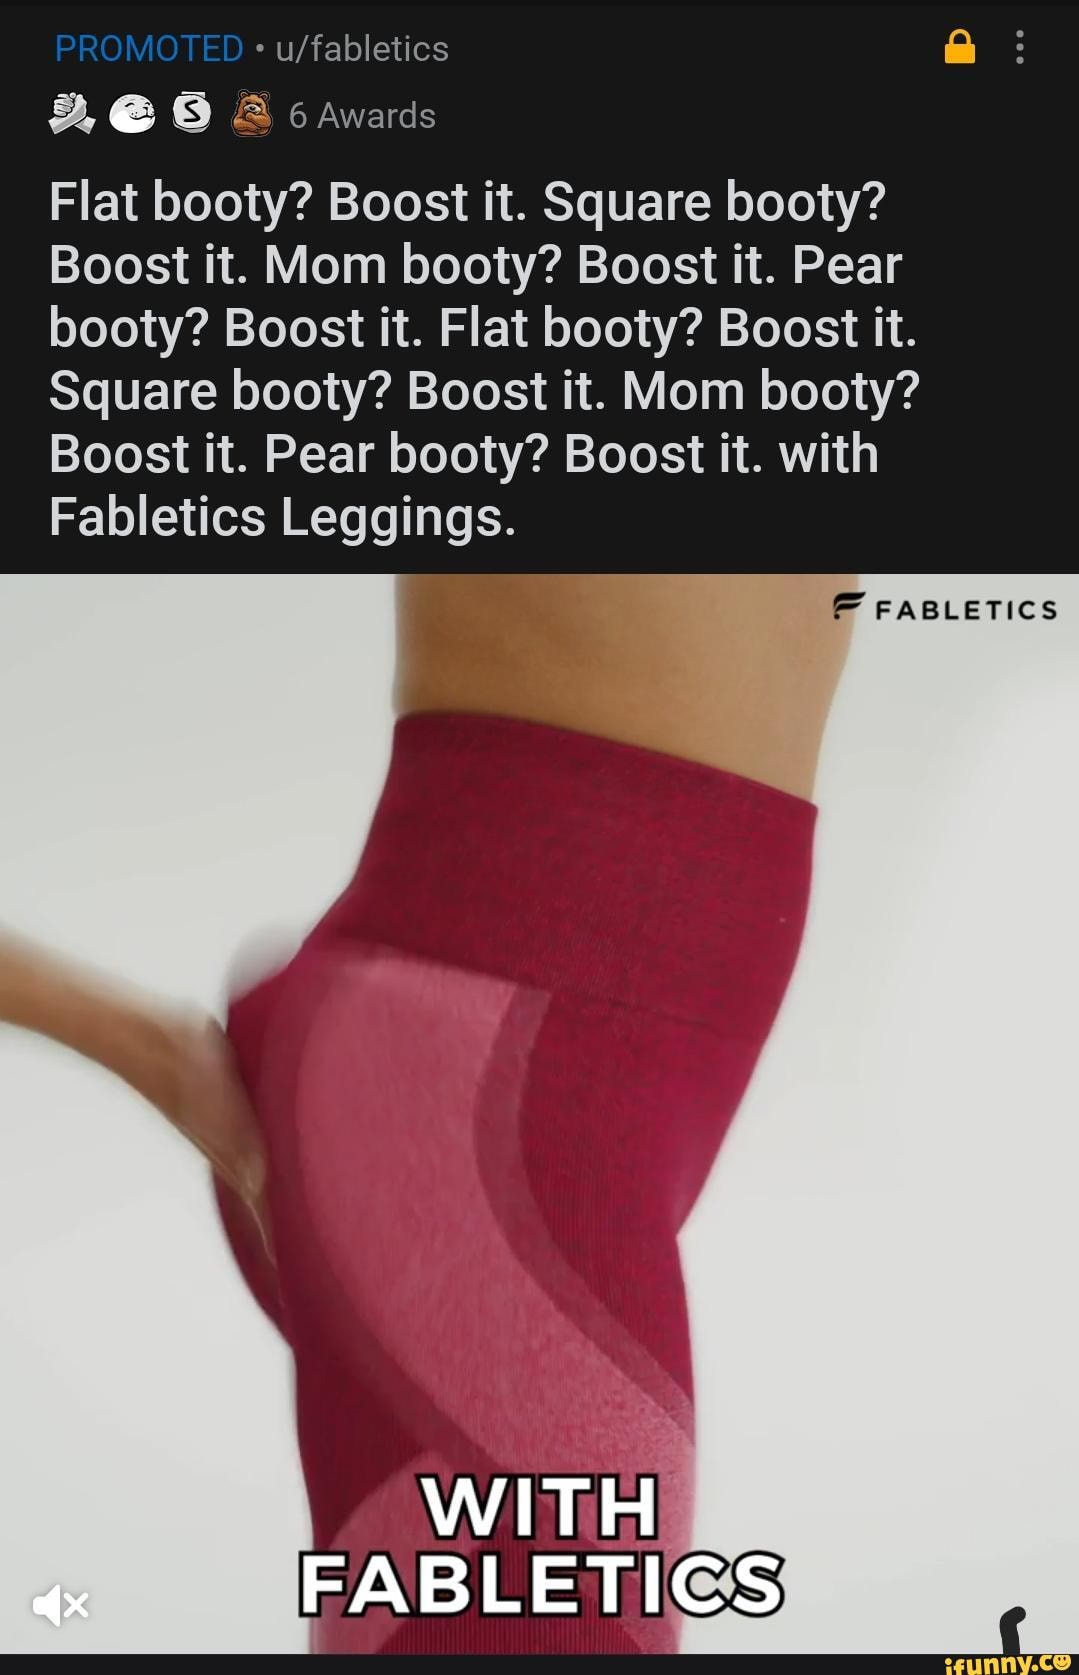 Flat booty? Boost it. Square booty? Boost it. Mom booty? Boost it